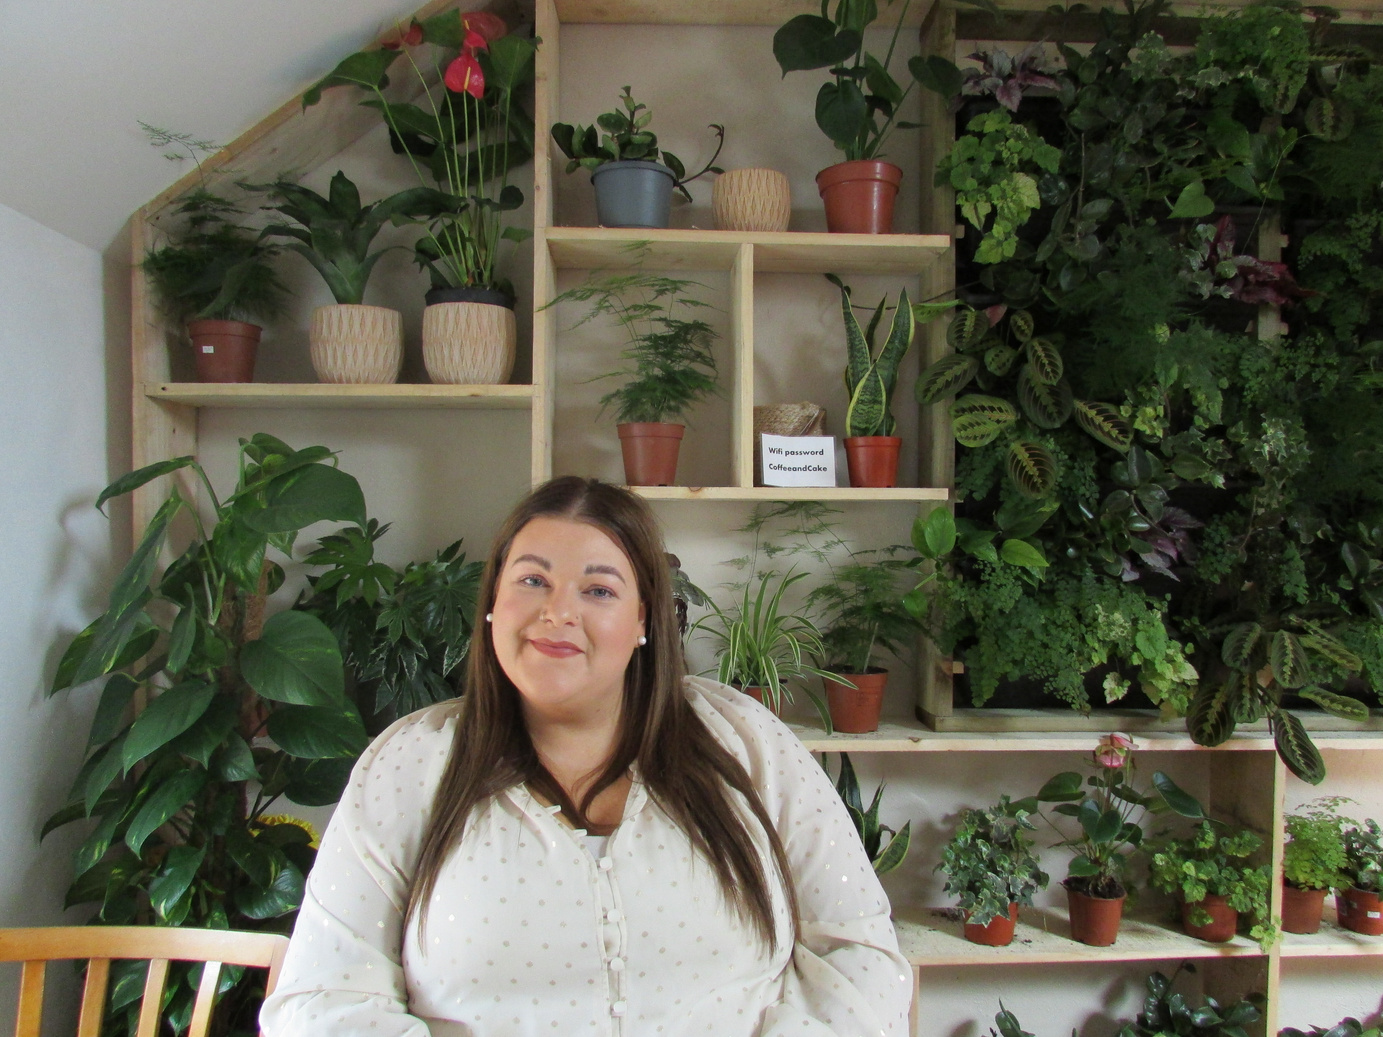 This is a picture of me sitting in front of a heart shaped display of plants